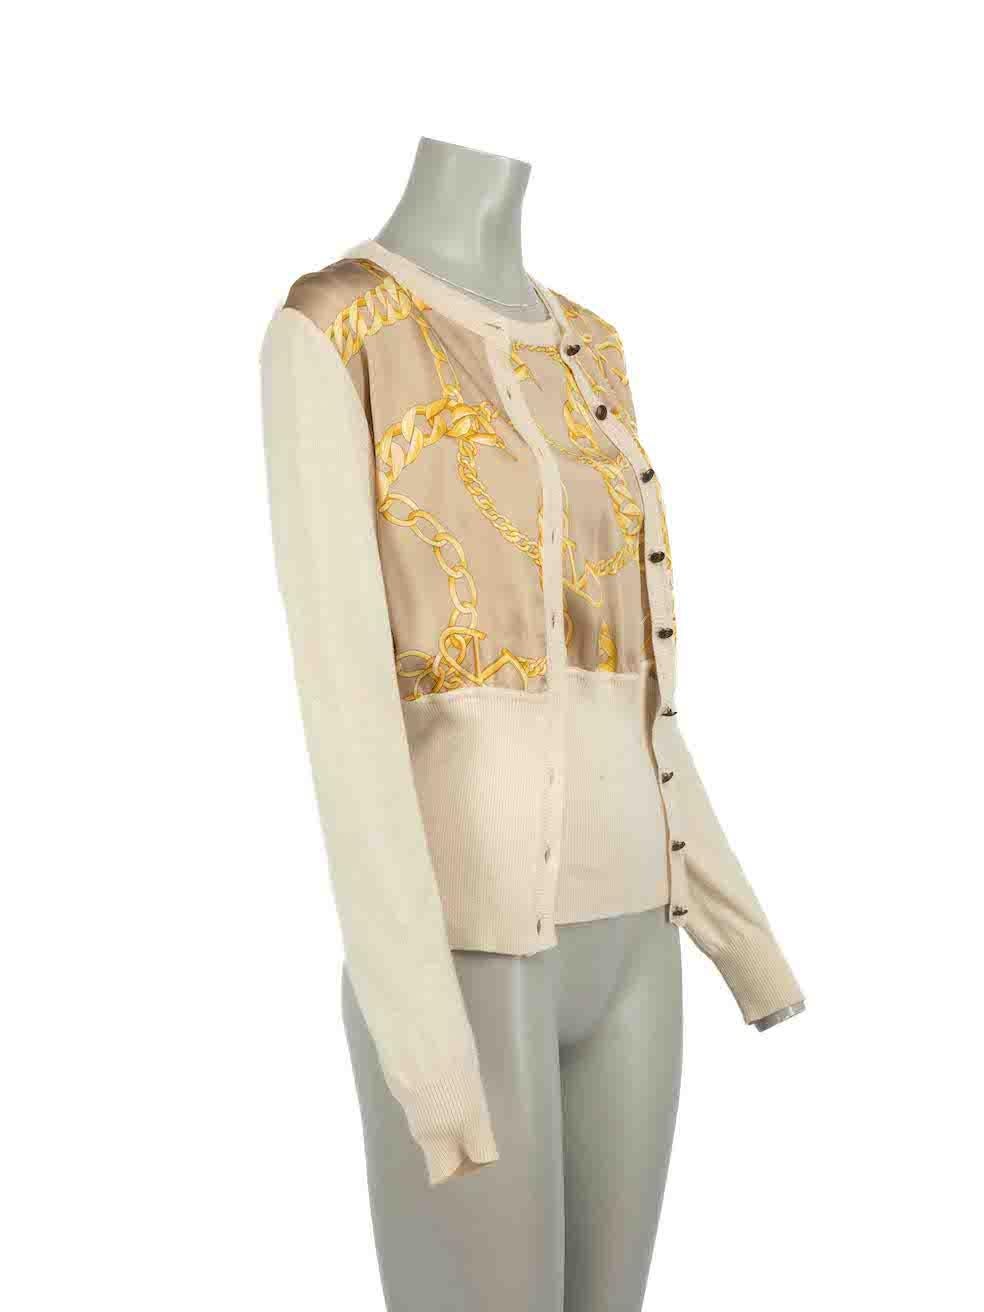 CONDITION is Good. Minor wear to top and cardigan set is evident. Light discoloured marks to silk panels on both the top and cardigan, and mild discoloured marks to wool areas on both pieces as well on this used Valentino designer resale item.